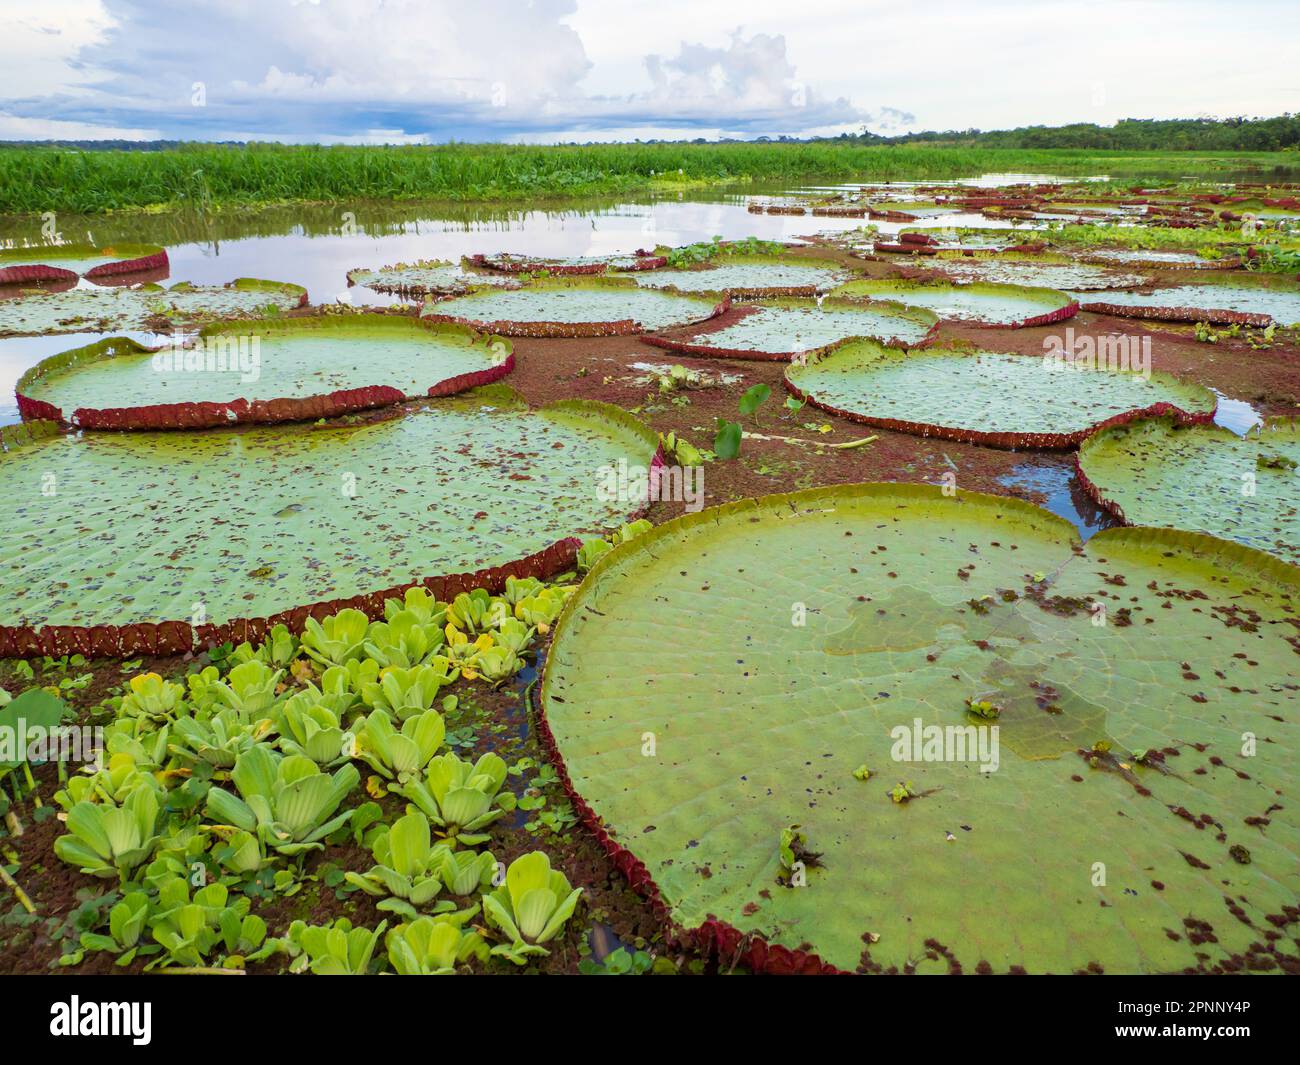 Victoria amazonica in Pacaya Samiria National Reserve. It is a species of flowering plant, the largest of the Nymphaeaceae family of water lilies. Ama Stock Photo